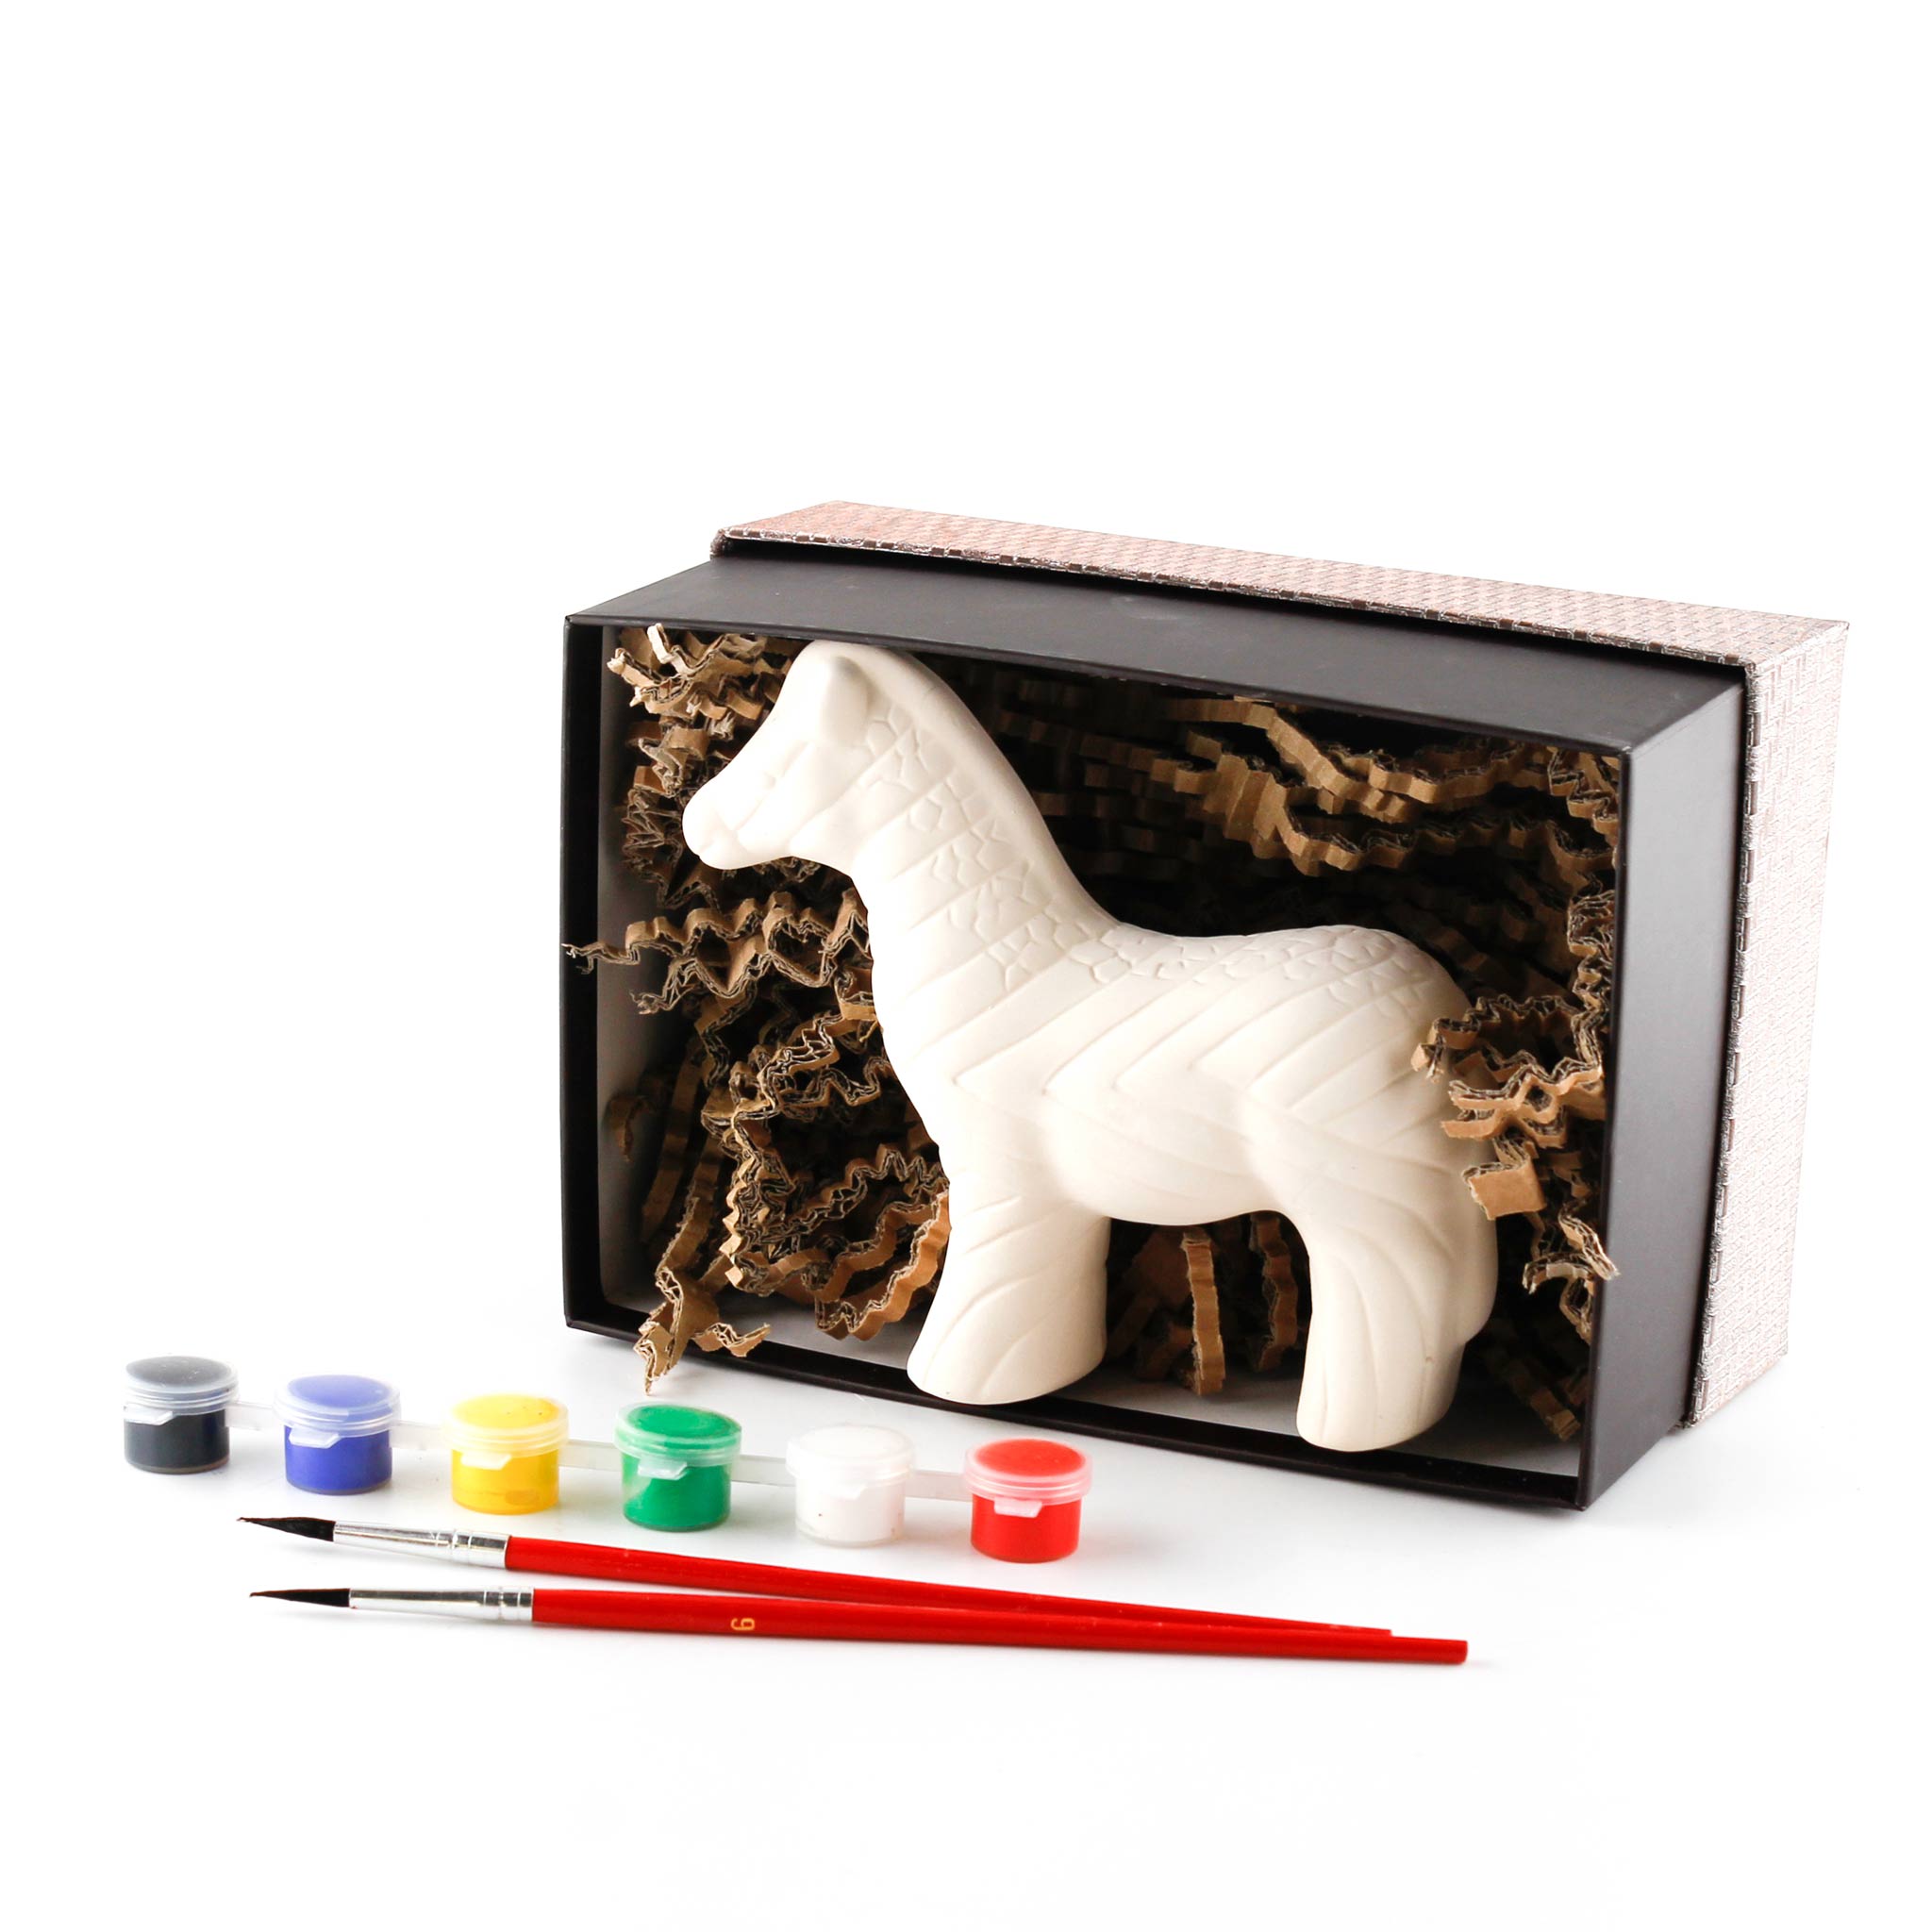 Unpainted ceramic zebra kit with paint and brushes